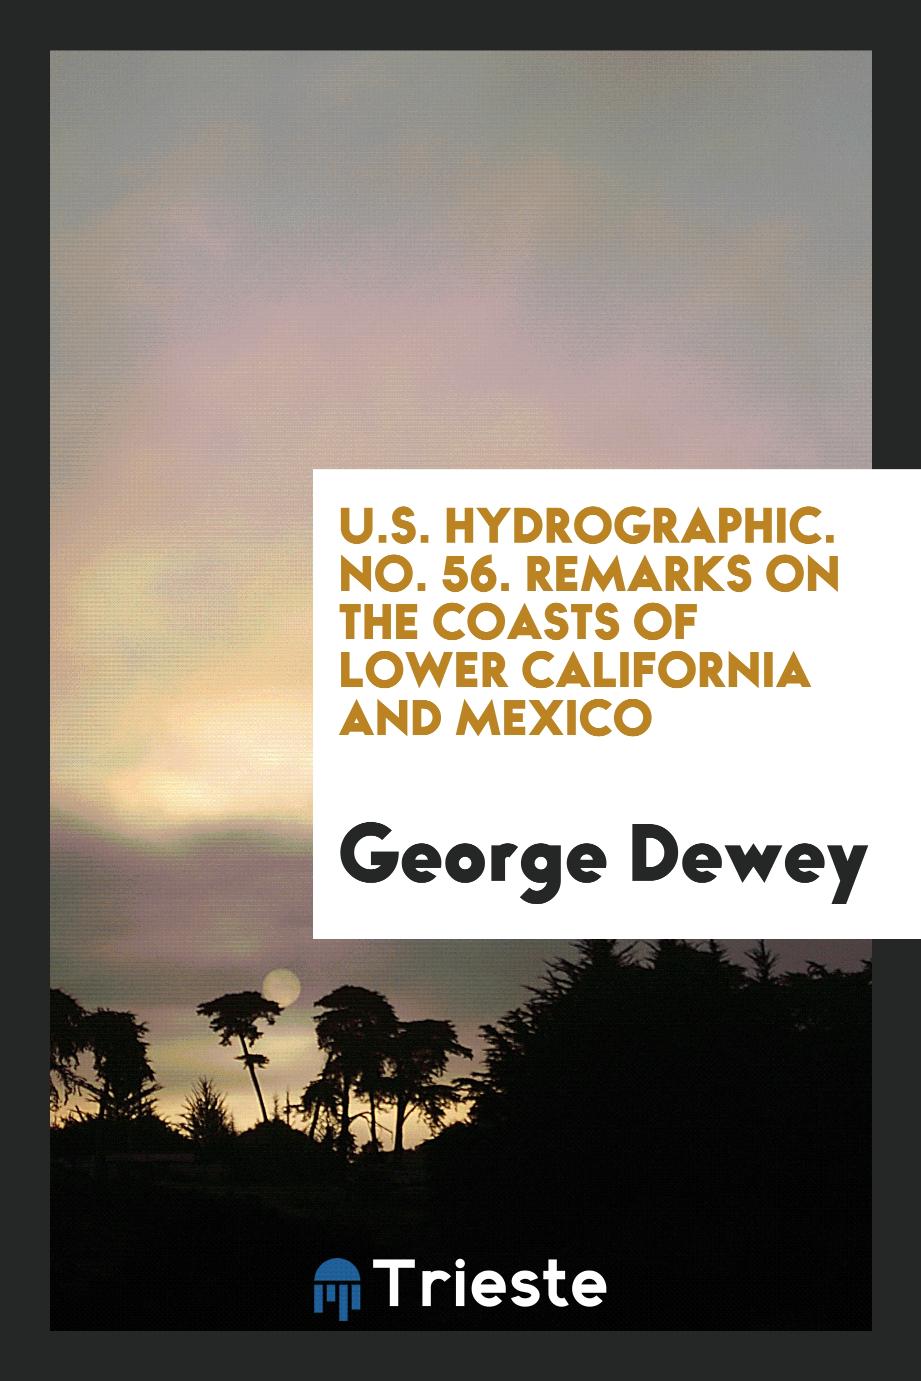 U.S. Hydrographic. No. 56. Remarks on the Coasts of Lower California and Mexico